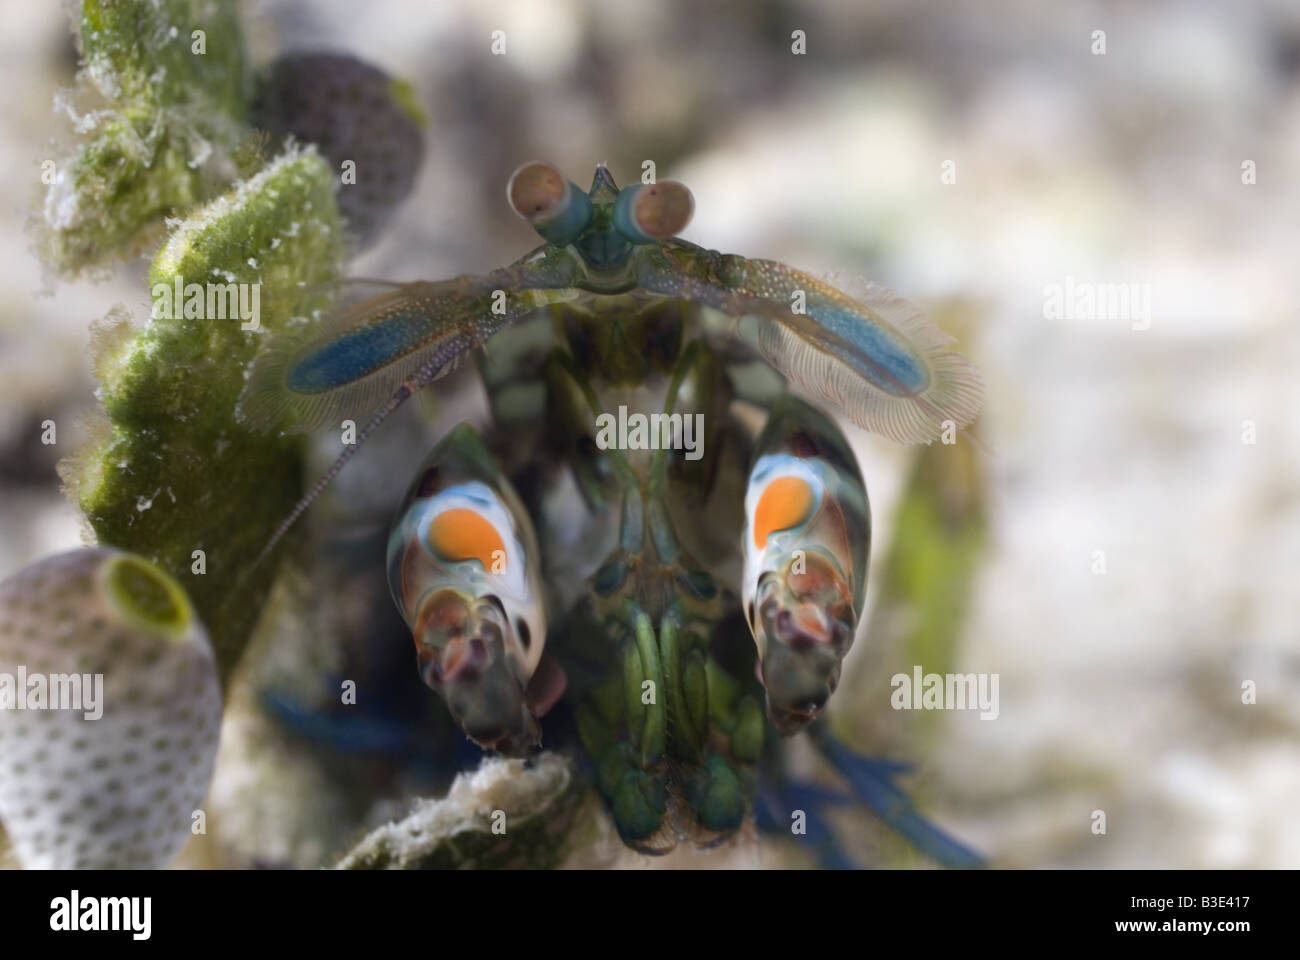 Mantis Shrimp hiding among the seagrass under water Stock Photo